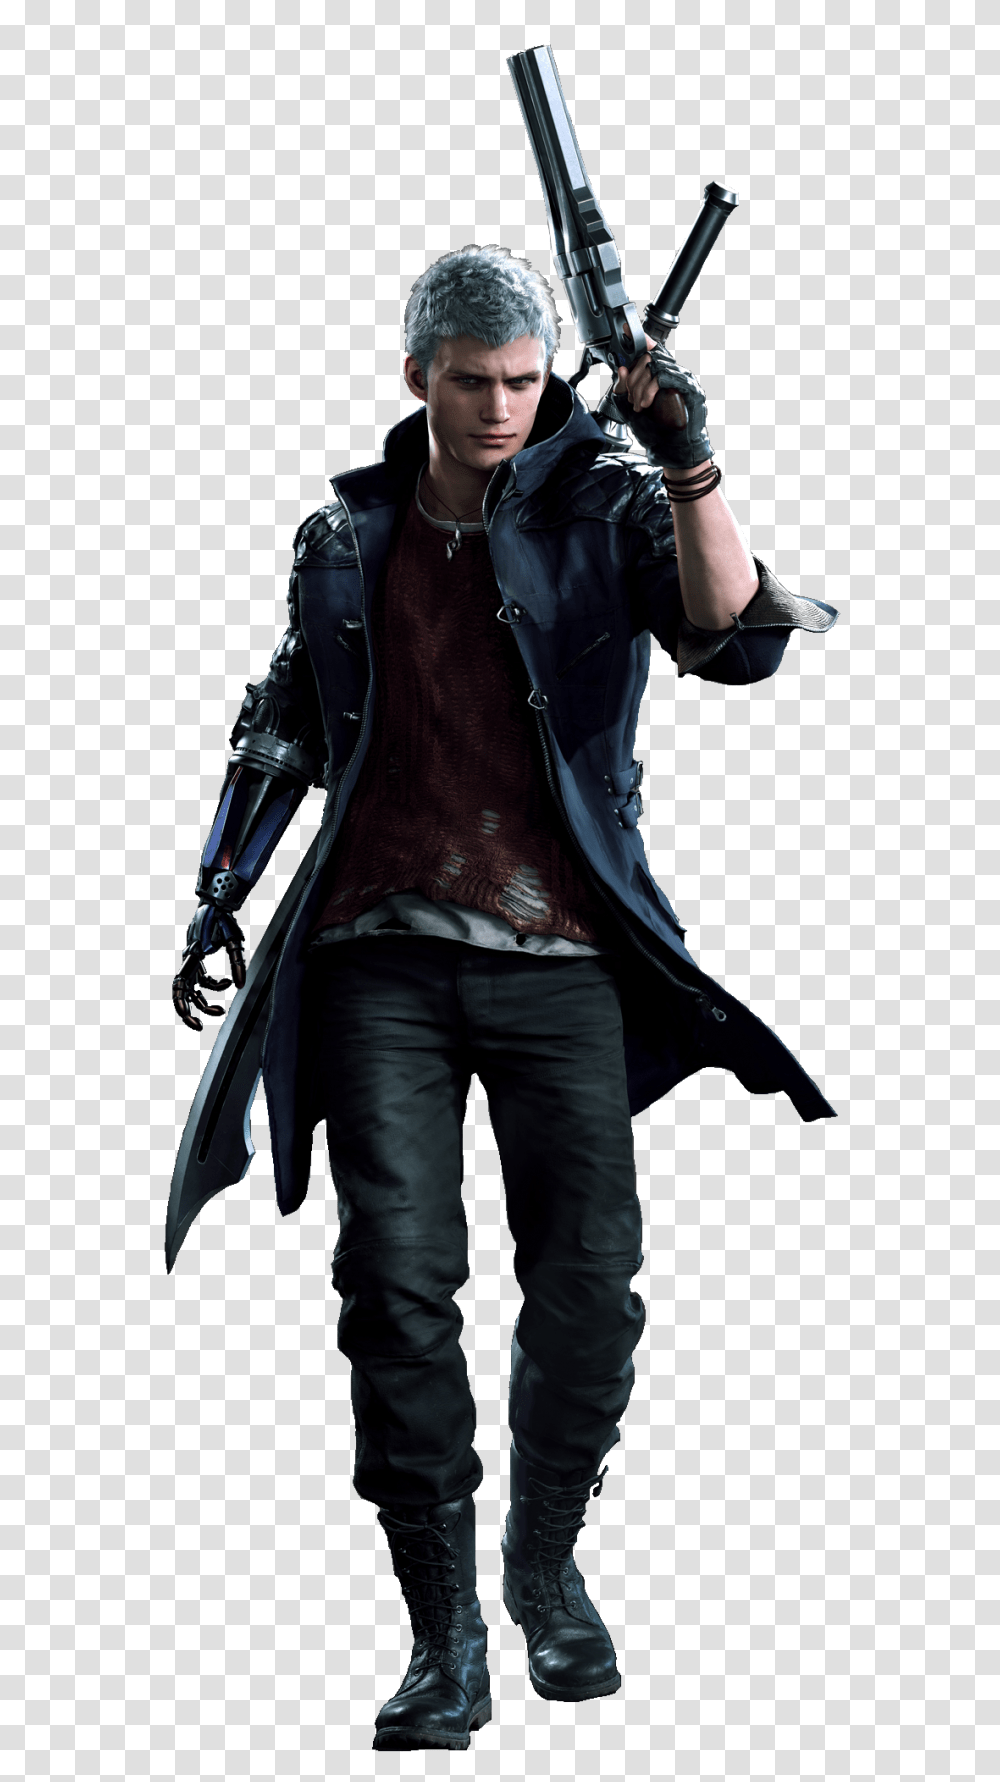 Image Result For Nero Devil May Cry Sketch Juice Devil May Cry, Person, Coat, Jacket Transparent Png